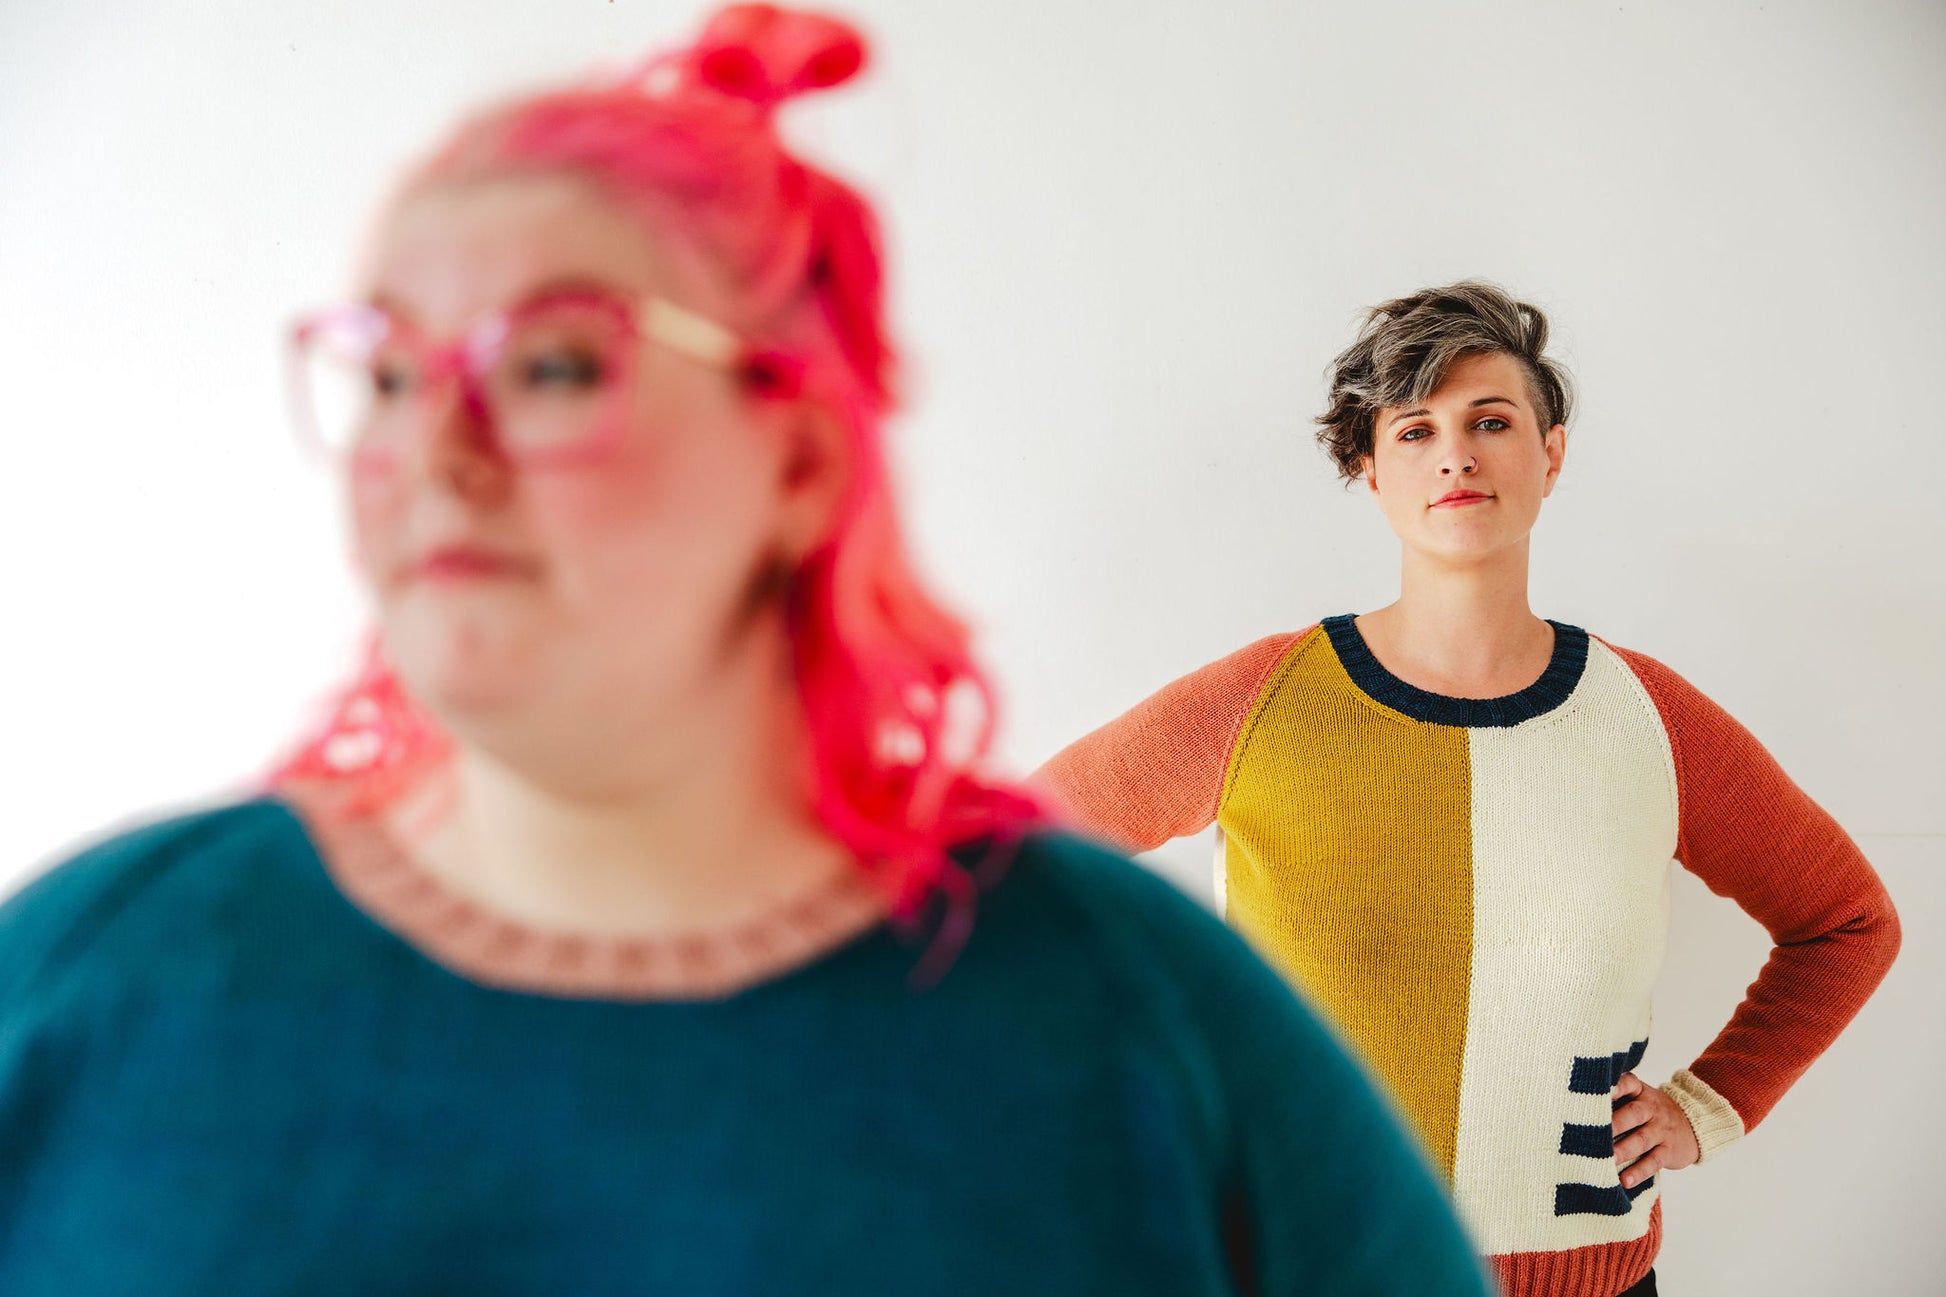 Jen stands behind Courtney, the camera focused on her. She wears an intarsia knit sweater of white, navy blue, pink, and ochre. In front of her, out of focus, Courtney wears a teal sweater knit with a pink, ribbed neckband.